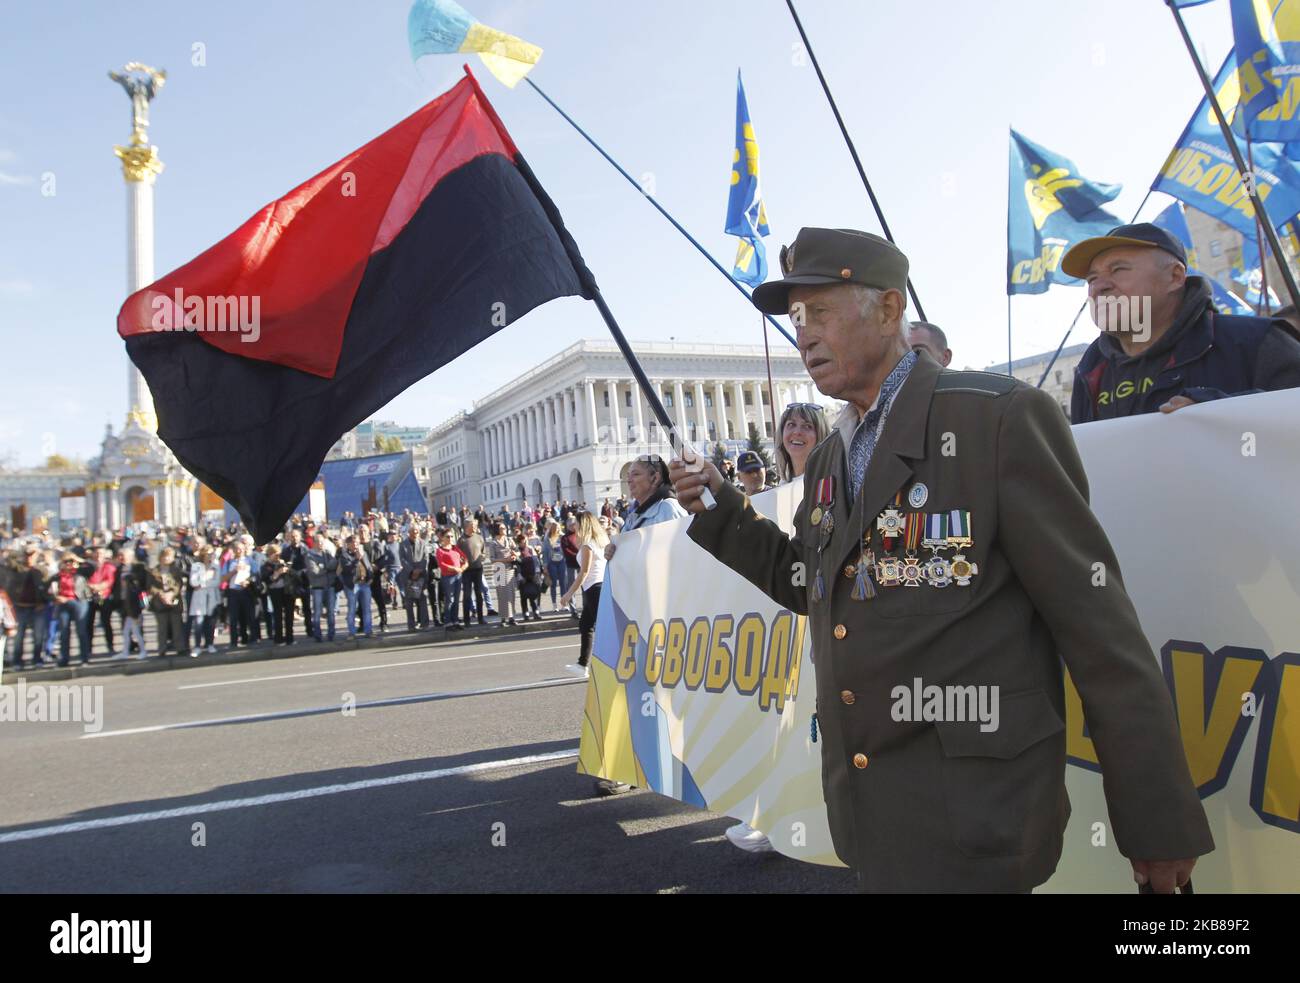 Ukrainians take part at a march to the 77th anniversary of the founding of the Ukrainian Insurgent Army in central Kiev, Ukraine, on 14 October, 2019. Thousands activists of different nationalist parties and movements marched in the center of Ukrainian capital celebrating the founding of the Ukrainian Insurgent Army and Defender of Ukraine Day. The Ukrainian Insurgent Army or UPA fought for Ukrainian independence against the Red Army and the Nazi wermacht during the WWII. (Photo by STR/NurPhoto) Stock Photo